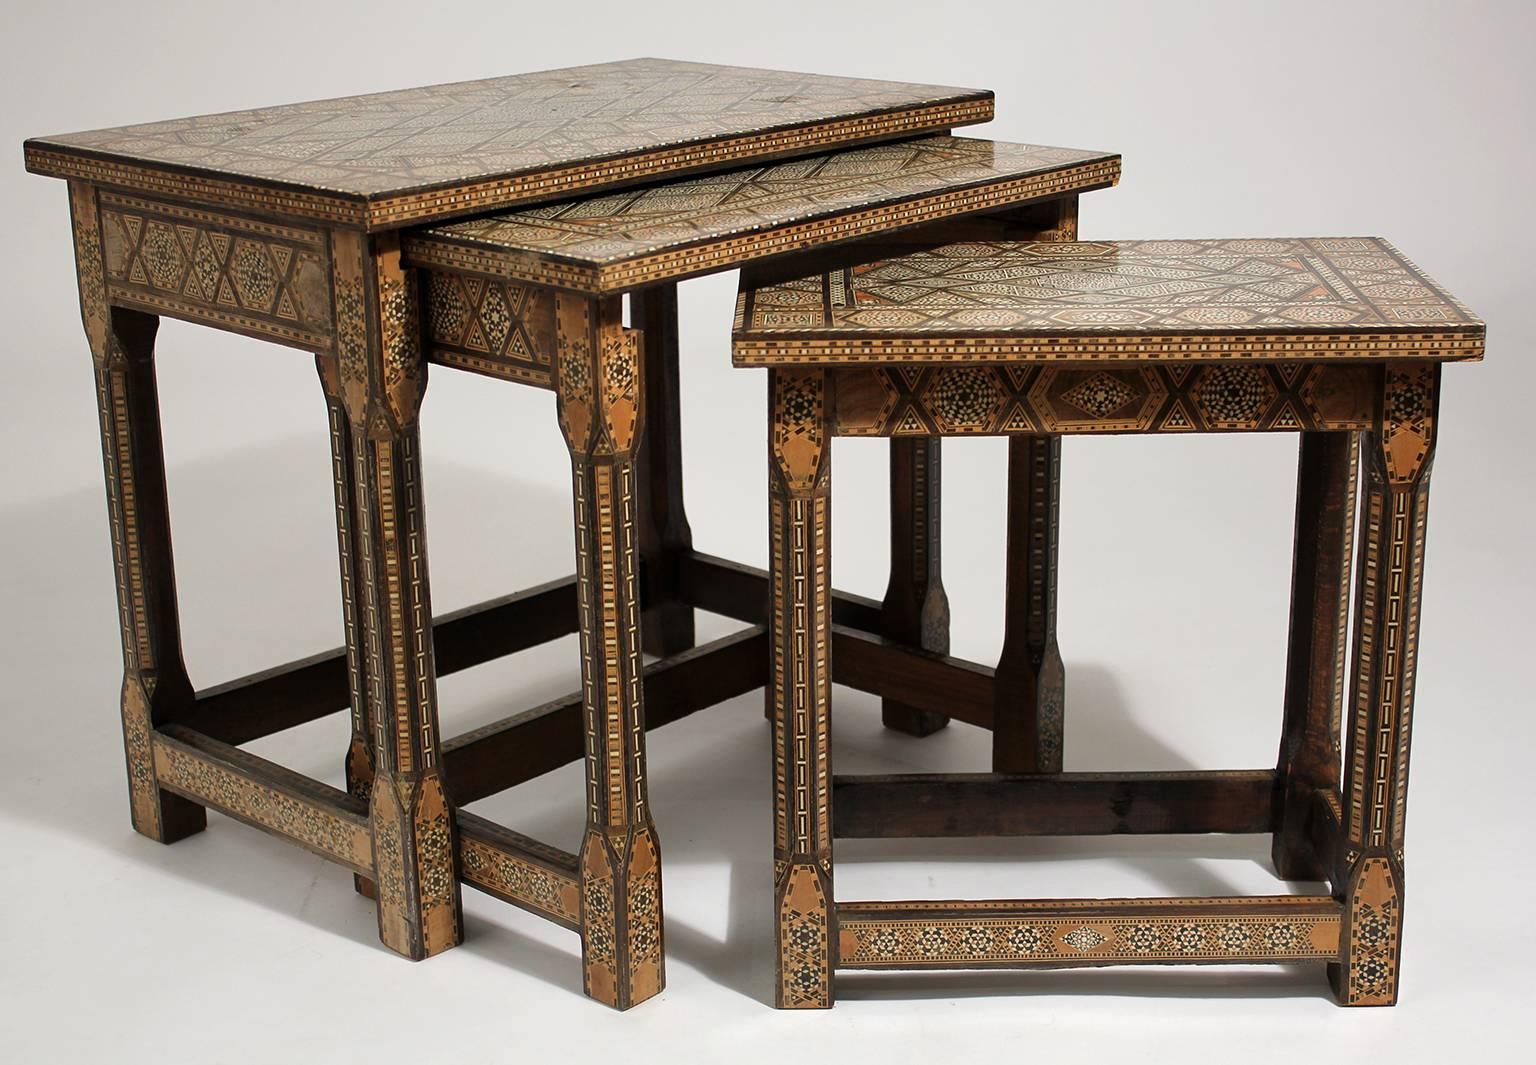 Beautiful set of three Moorsih marquetry inlay nesting tables. In very nice original condition with normal wear consistent from age. The tables are made of solid wood and inlay design is beautiful. 

Table measurements are:
Large: 21.25